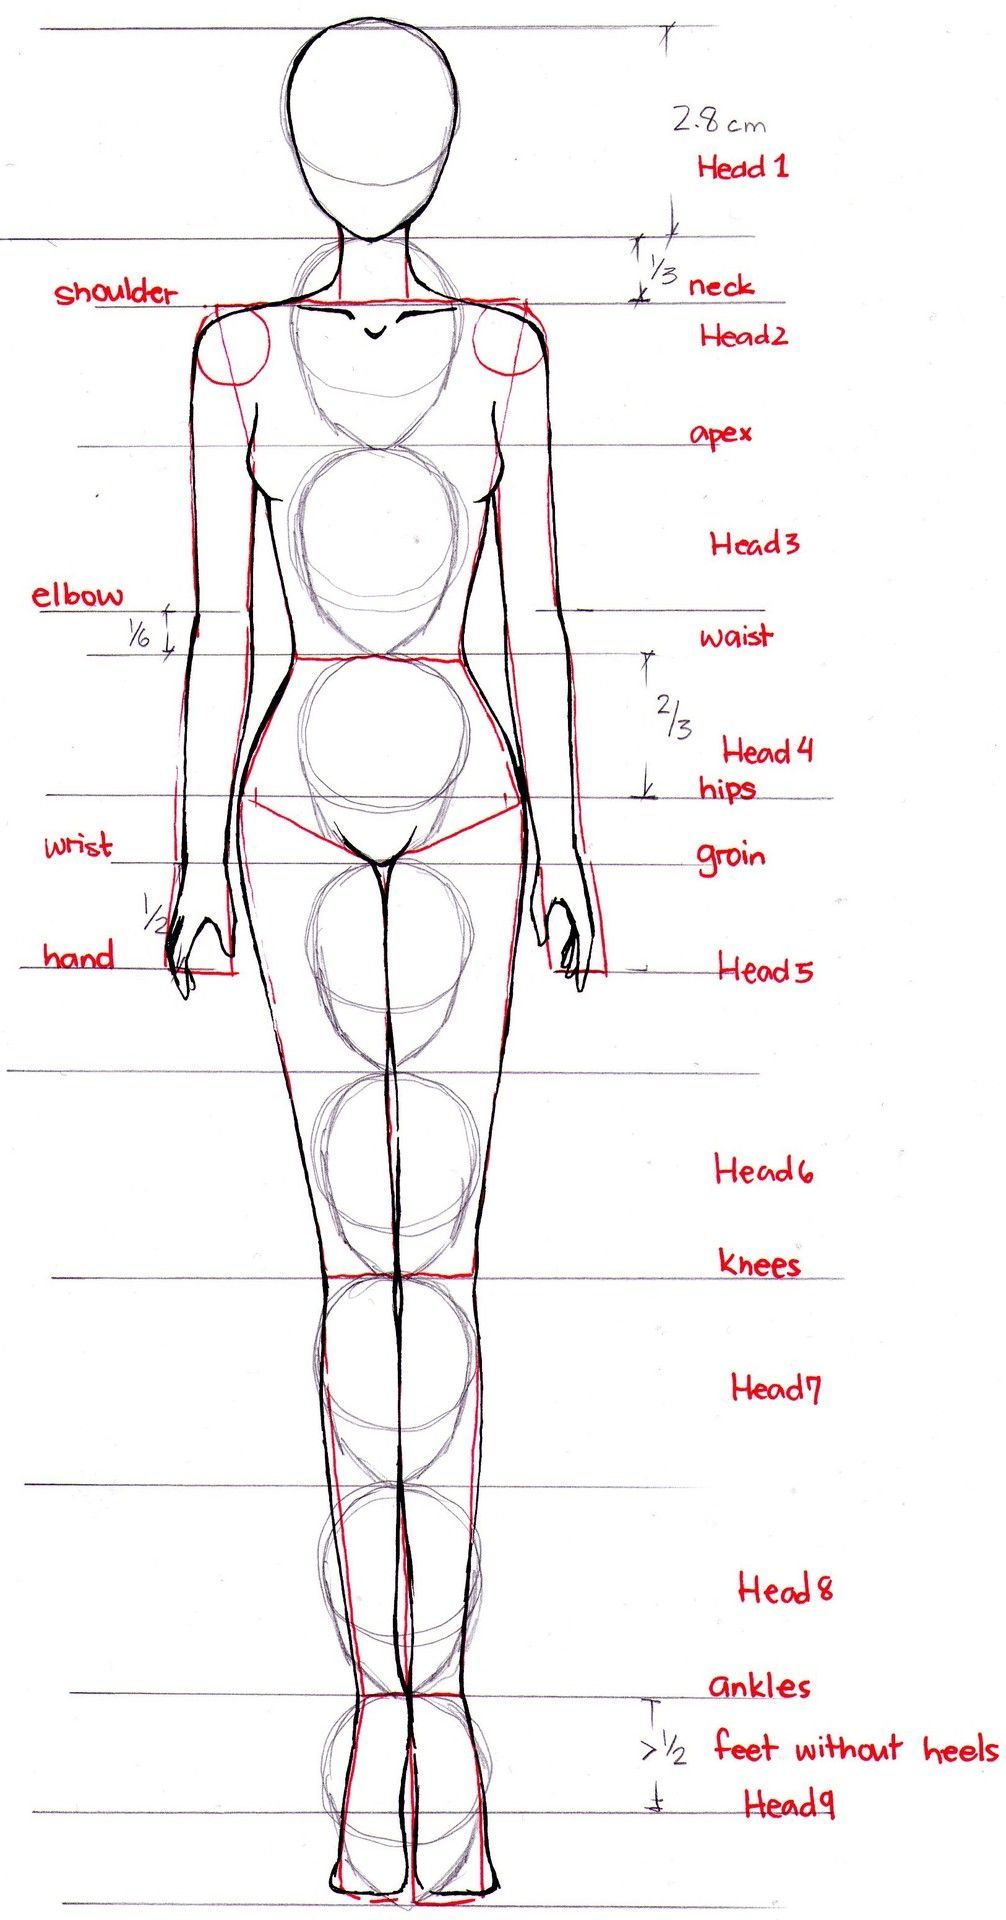 How to proportion the anime/manga/fashion style female body. — Drawing tools, inspiration, tutorial